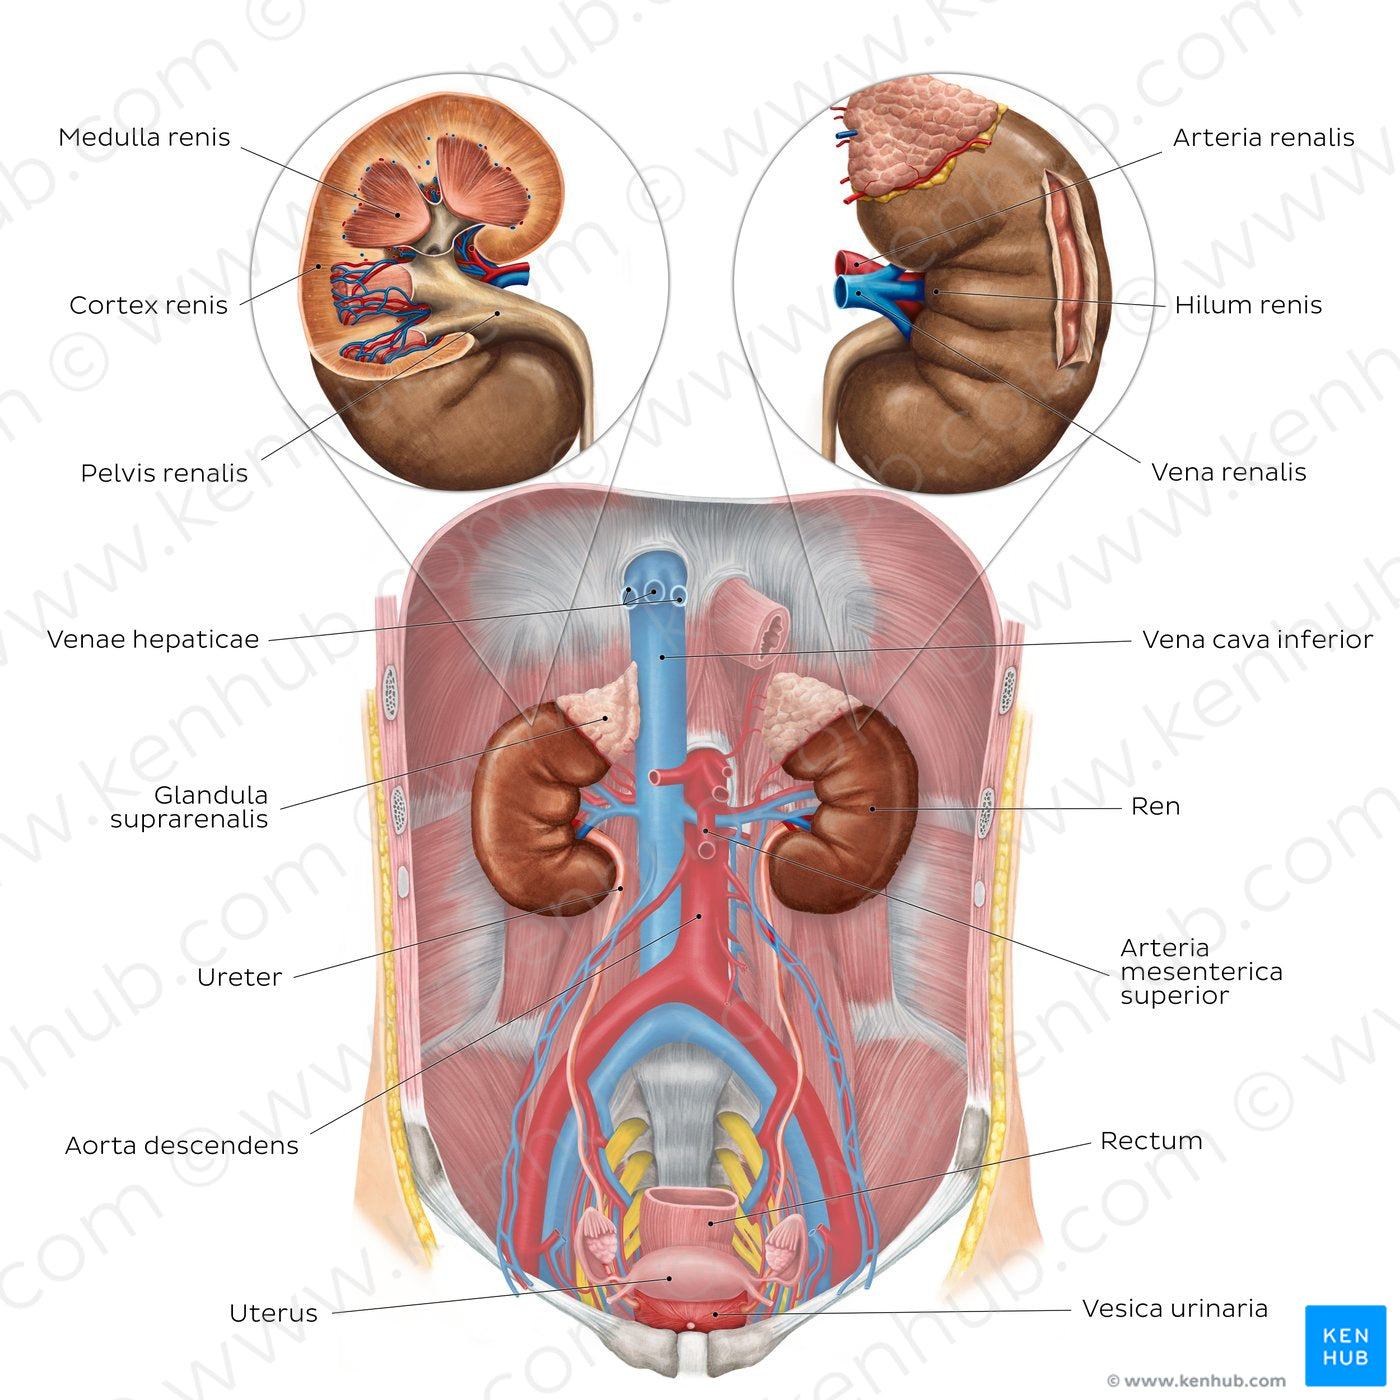 Urinary system - Overview (Latin)